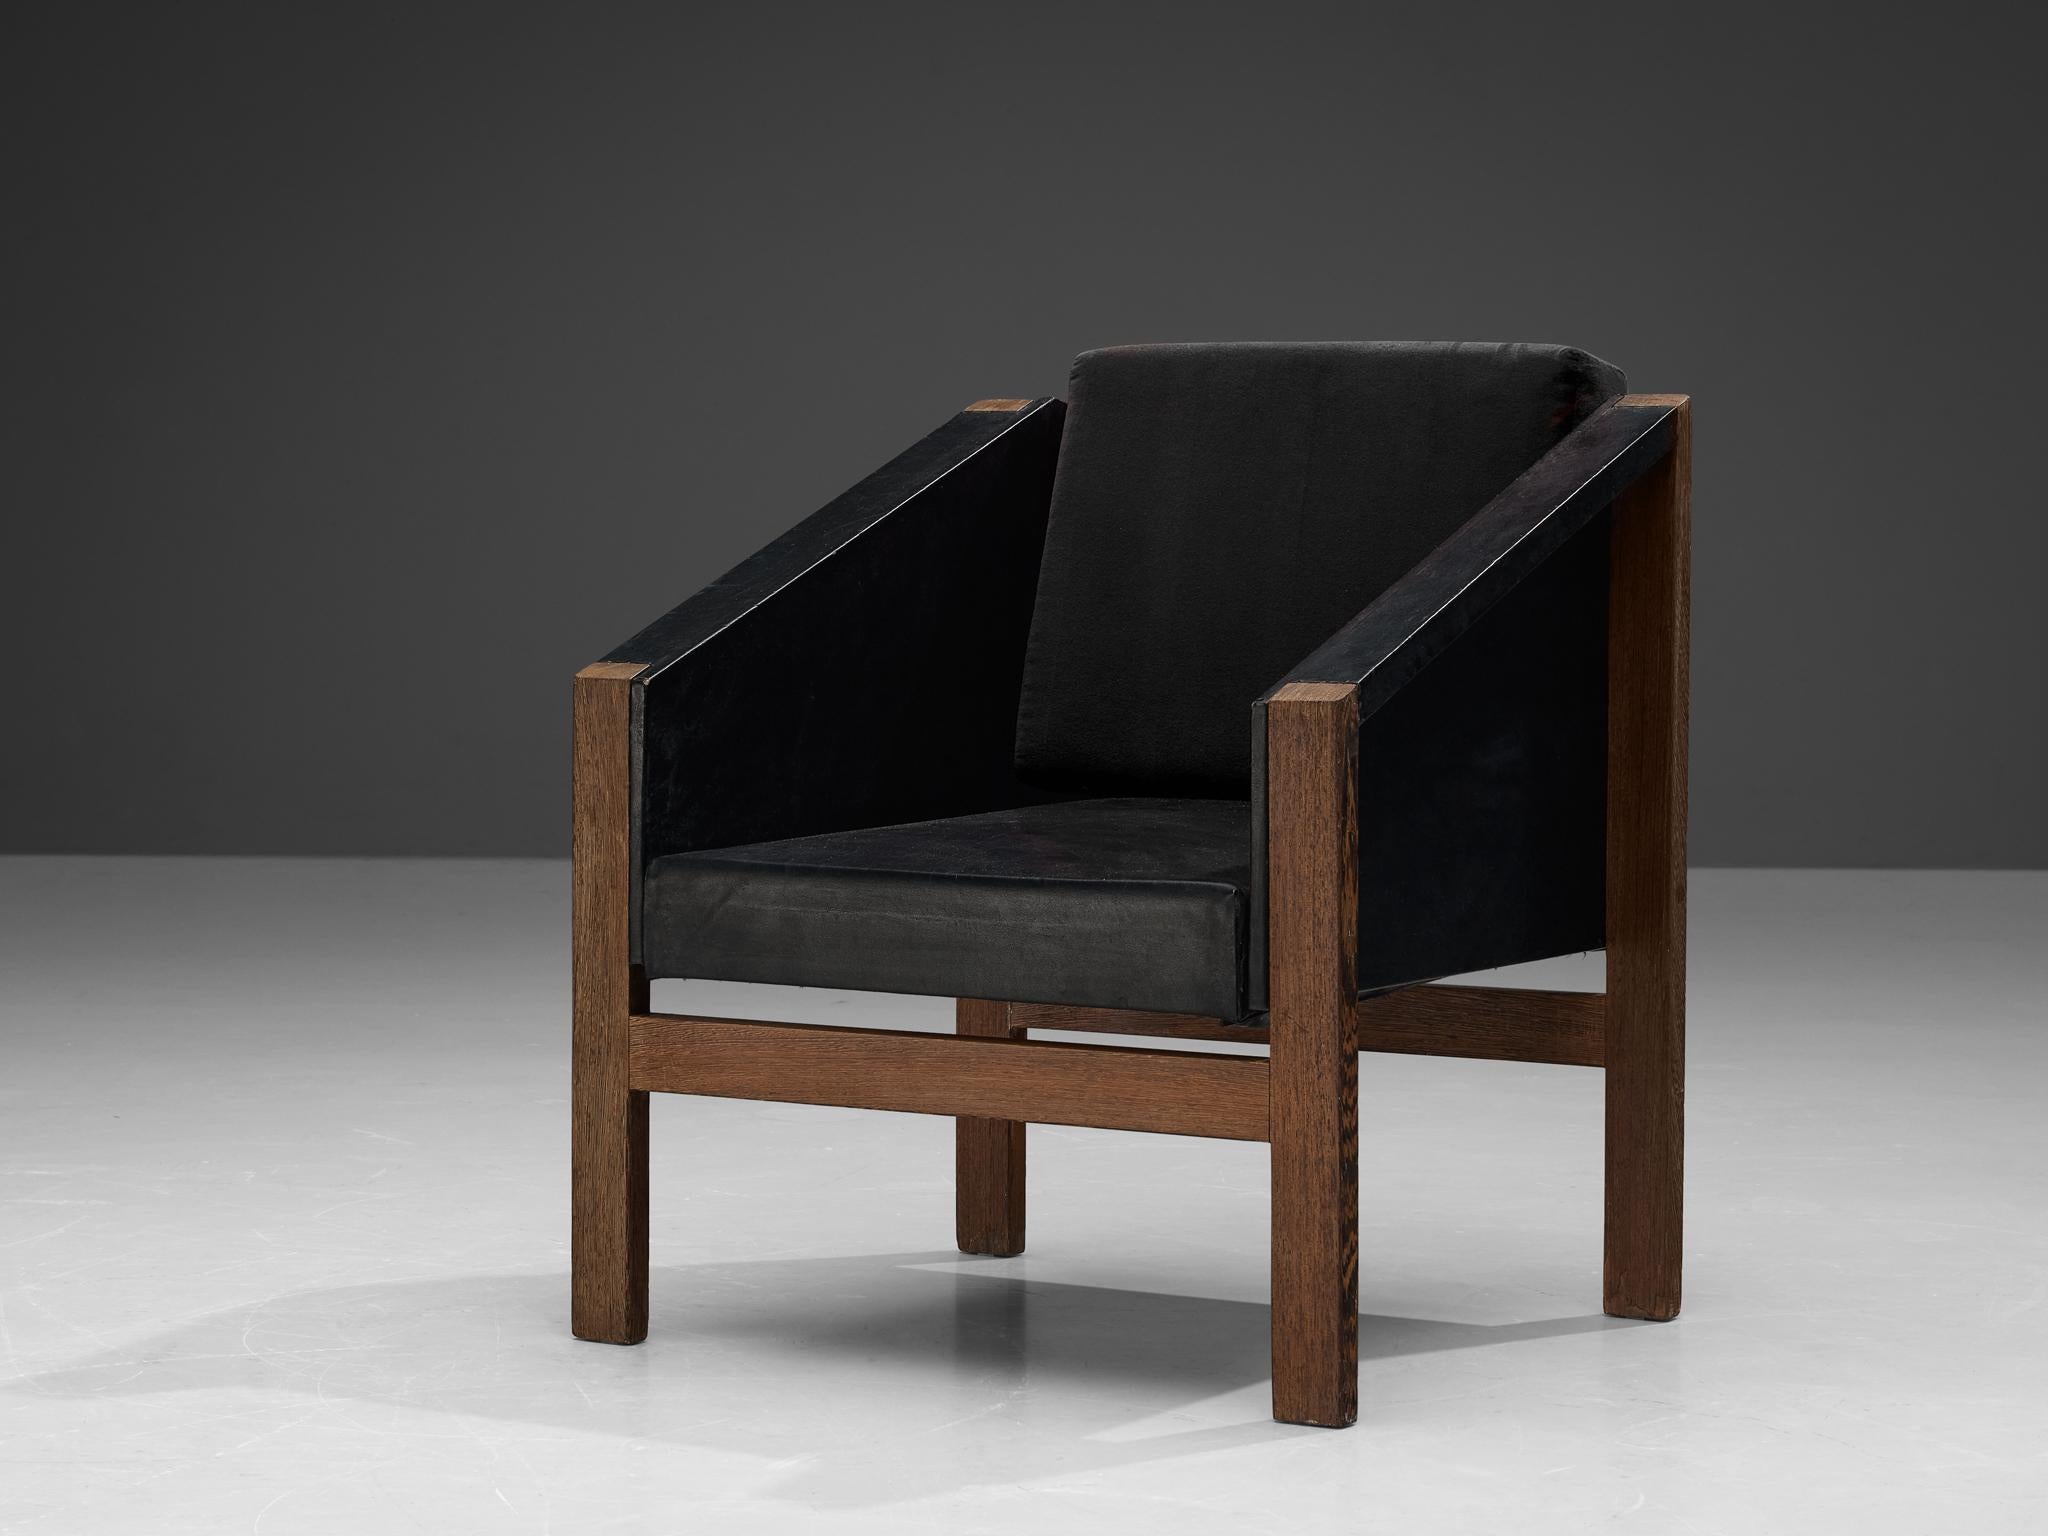 Armchair, wengé, black leatherette, Europe, 1960s. 

Eccentric armchair with quirky geometric lines. Its design strongly resembles the distinguished designs of Dutch designer Wim den Boon. Note for example the sharp lines of the armrests that